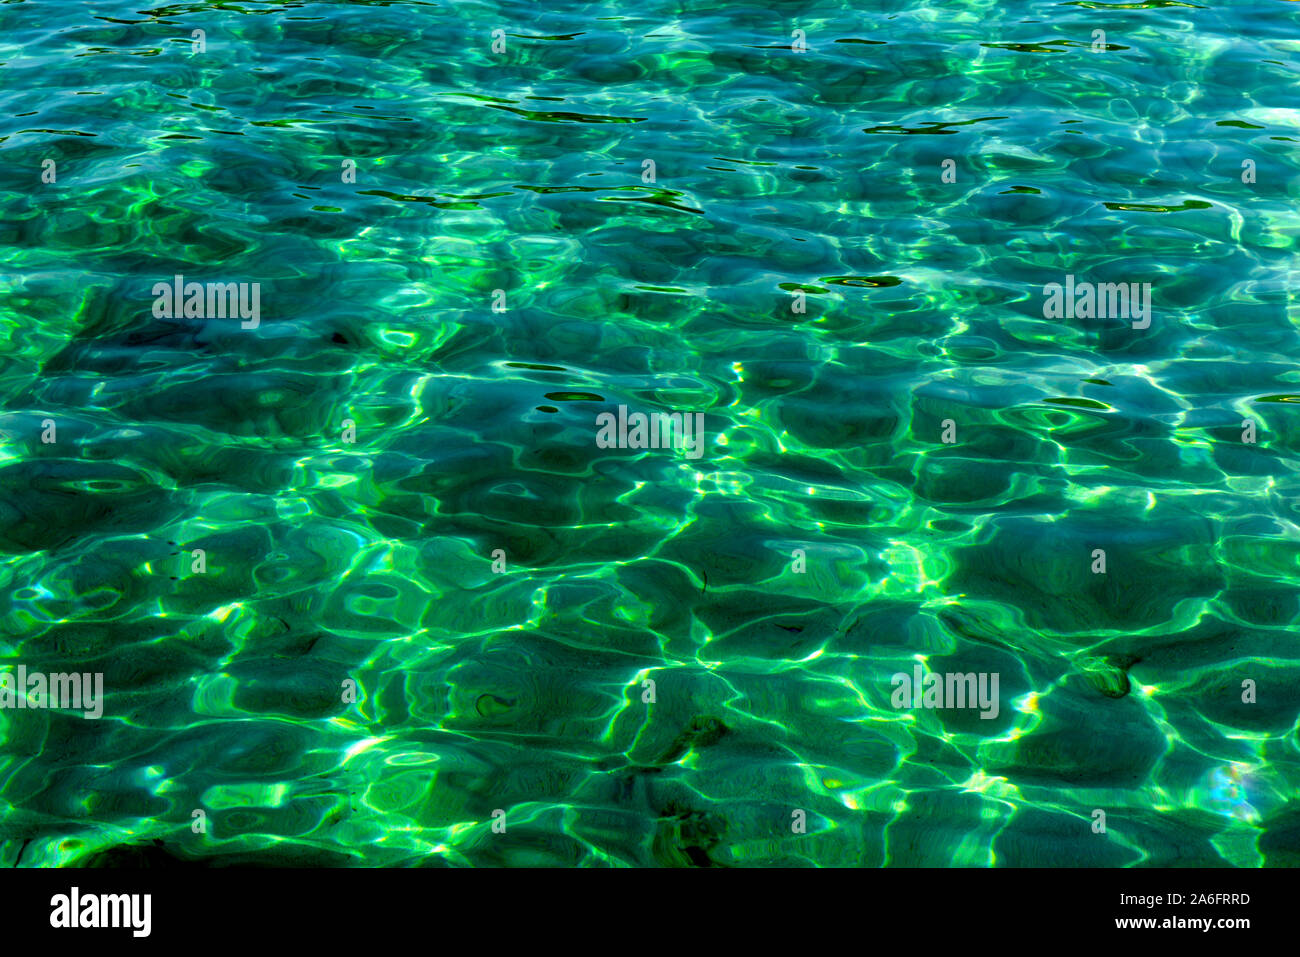 Dappled light patterns in clear green rippling sea water with distorted view of rocks on bottom Stock Photo